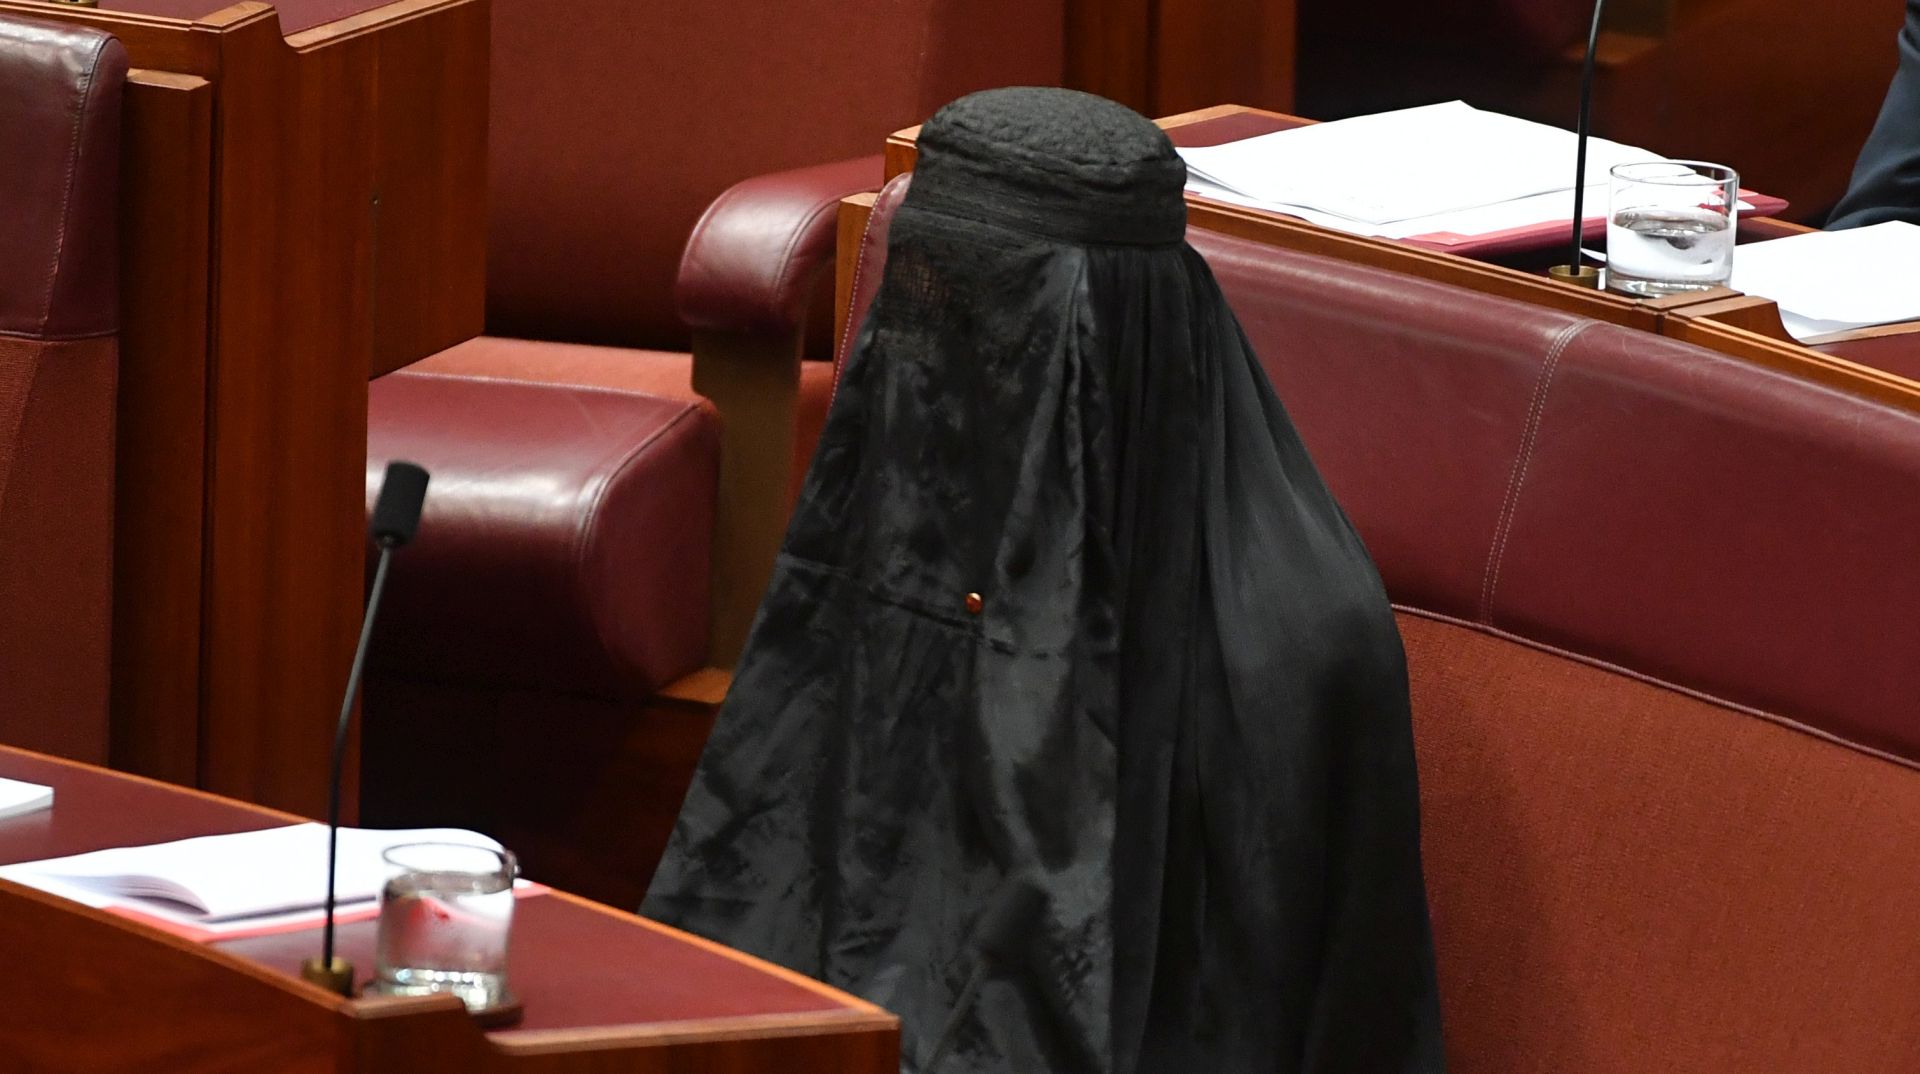 epa06147924 One Nation Leader Senator Pauline Hanson wears a full Islamic burqa veil in the Senate chamber at Parliament House in Canberra, Australian Capital Territory, Australia, 17 August 2017. Hanson attended Senate Question Time wearing a full burqa and she is expected to deliver later in the day a speech calling for the banning on full face coverings in public, media reported. Her identified was checked before entering the red chamber, media added.  EPA/MICK TSIKAS  AUSTRALIA AND NEW ZEALAND OUT